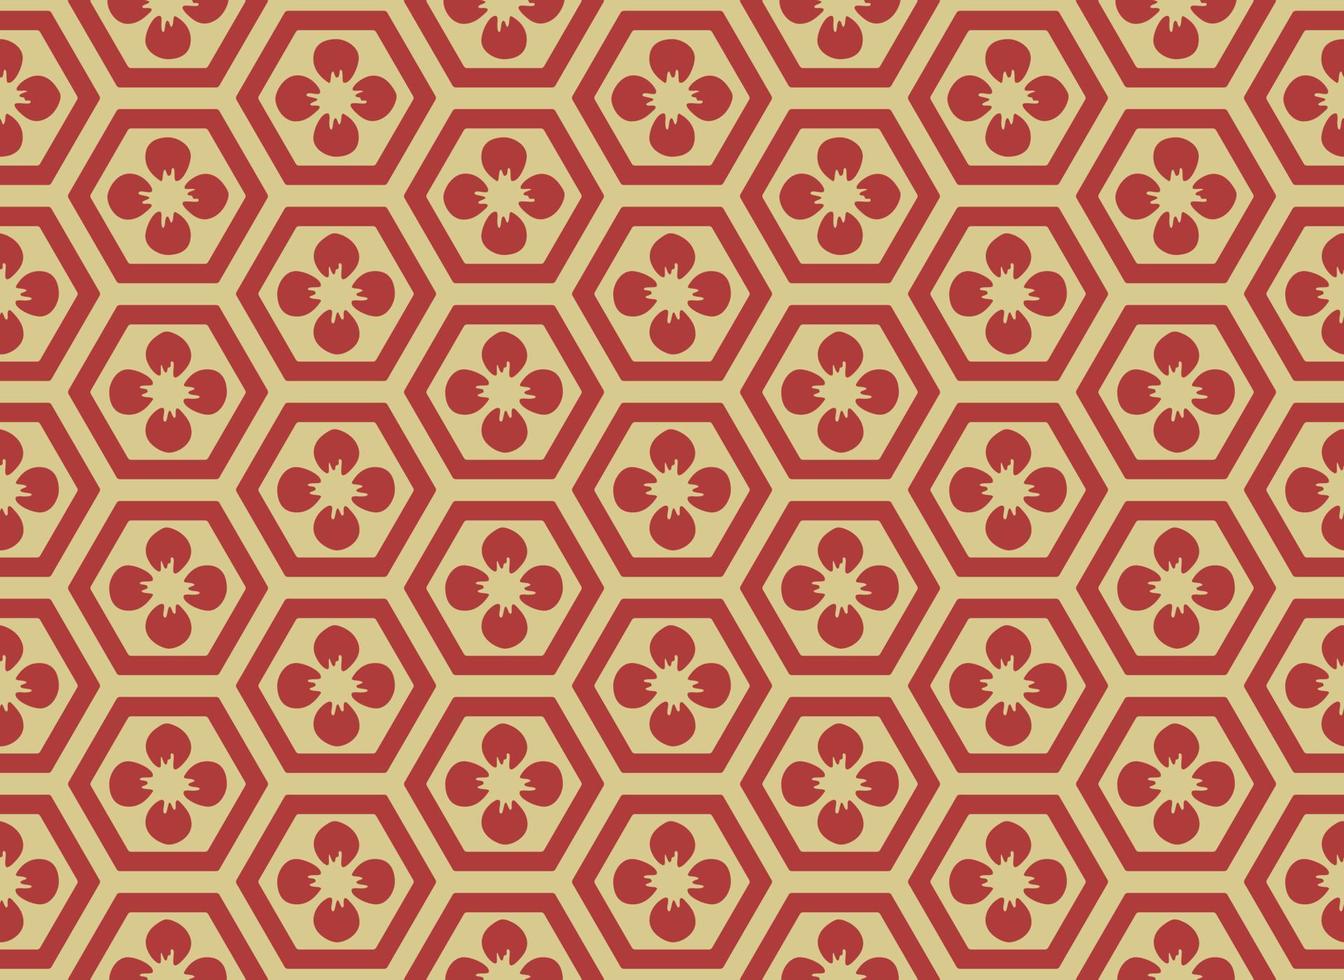 Traditional Asian hexagon pattern, seamless tiles vector design. Retro inspired oriental design, with red and gold colors